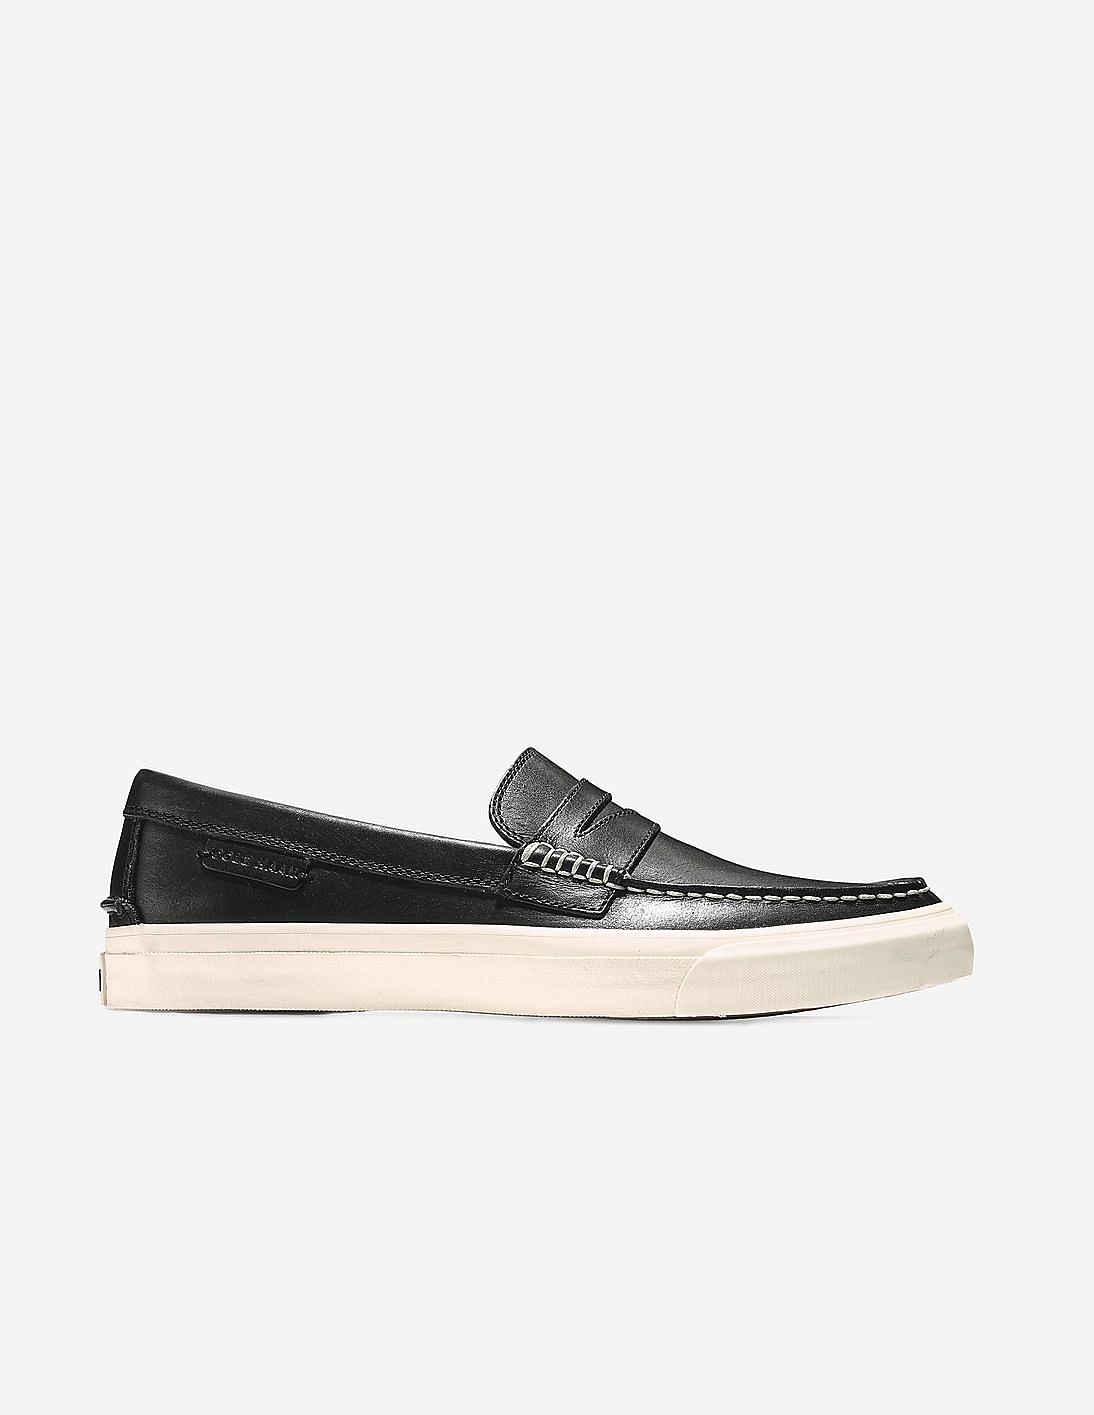 Buy Cole Haan Pinch Weekender LX Penny Loafer - NNNOW.com